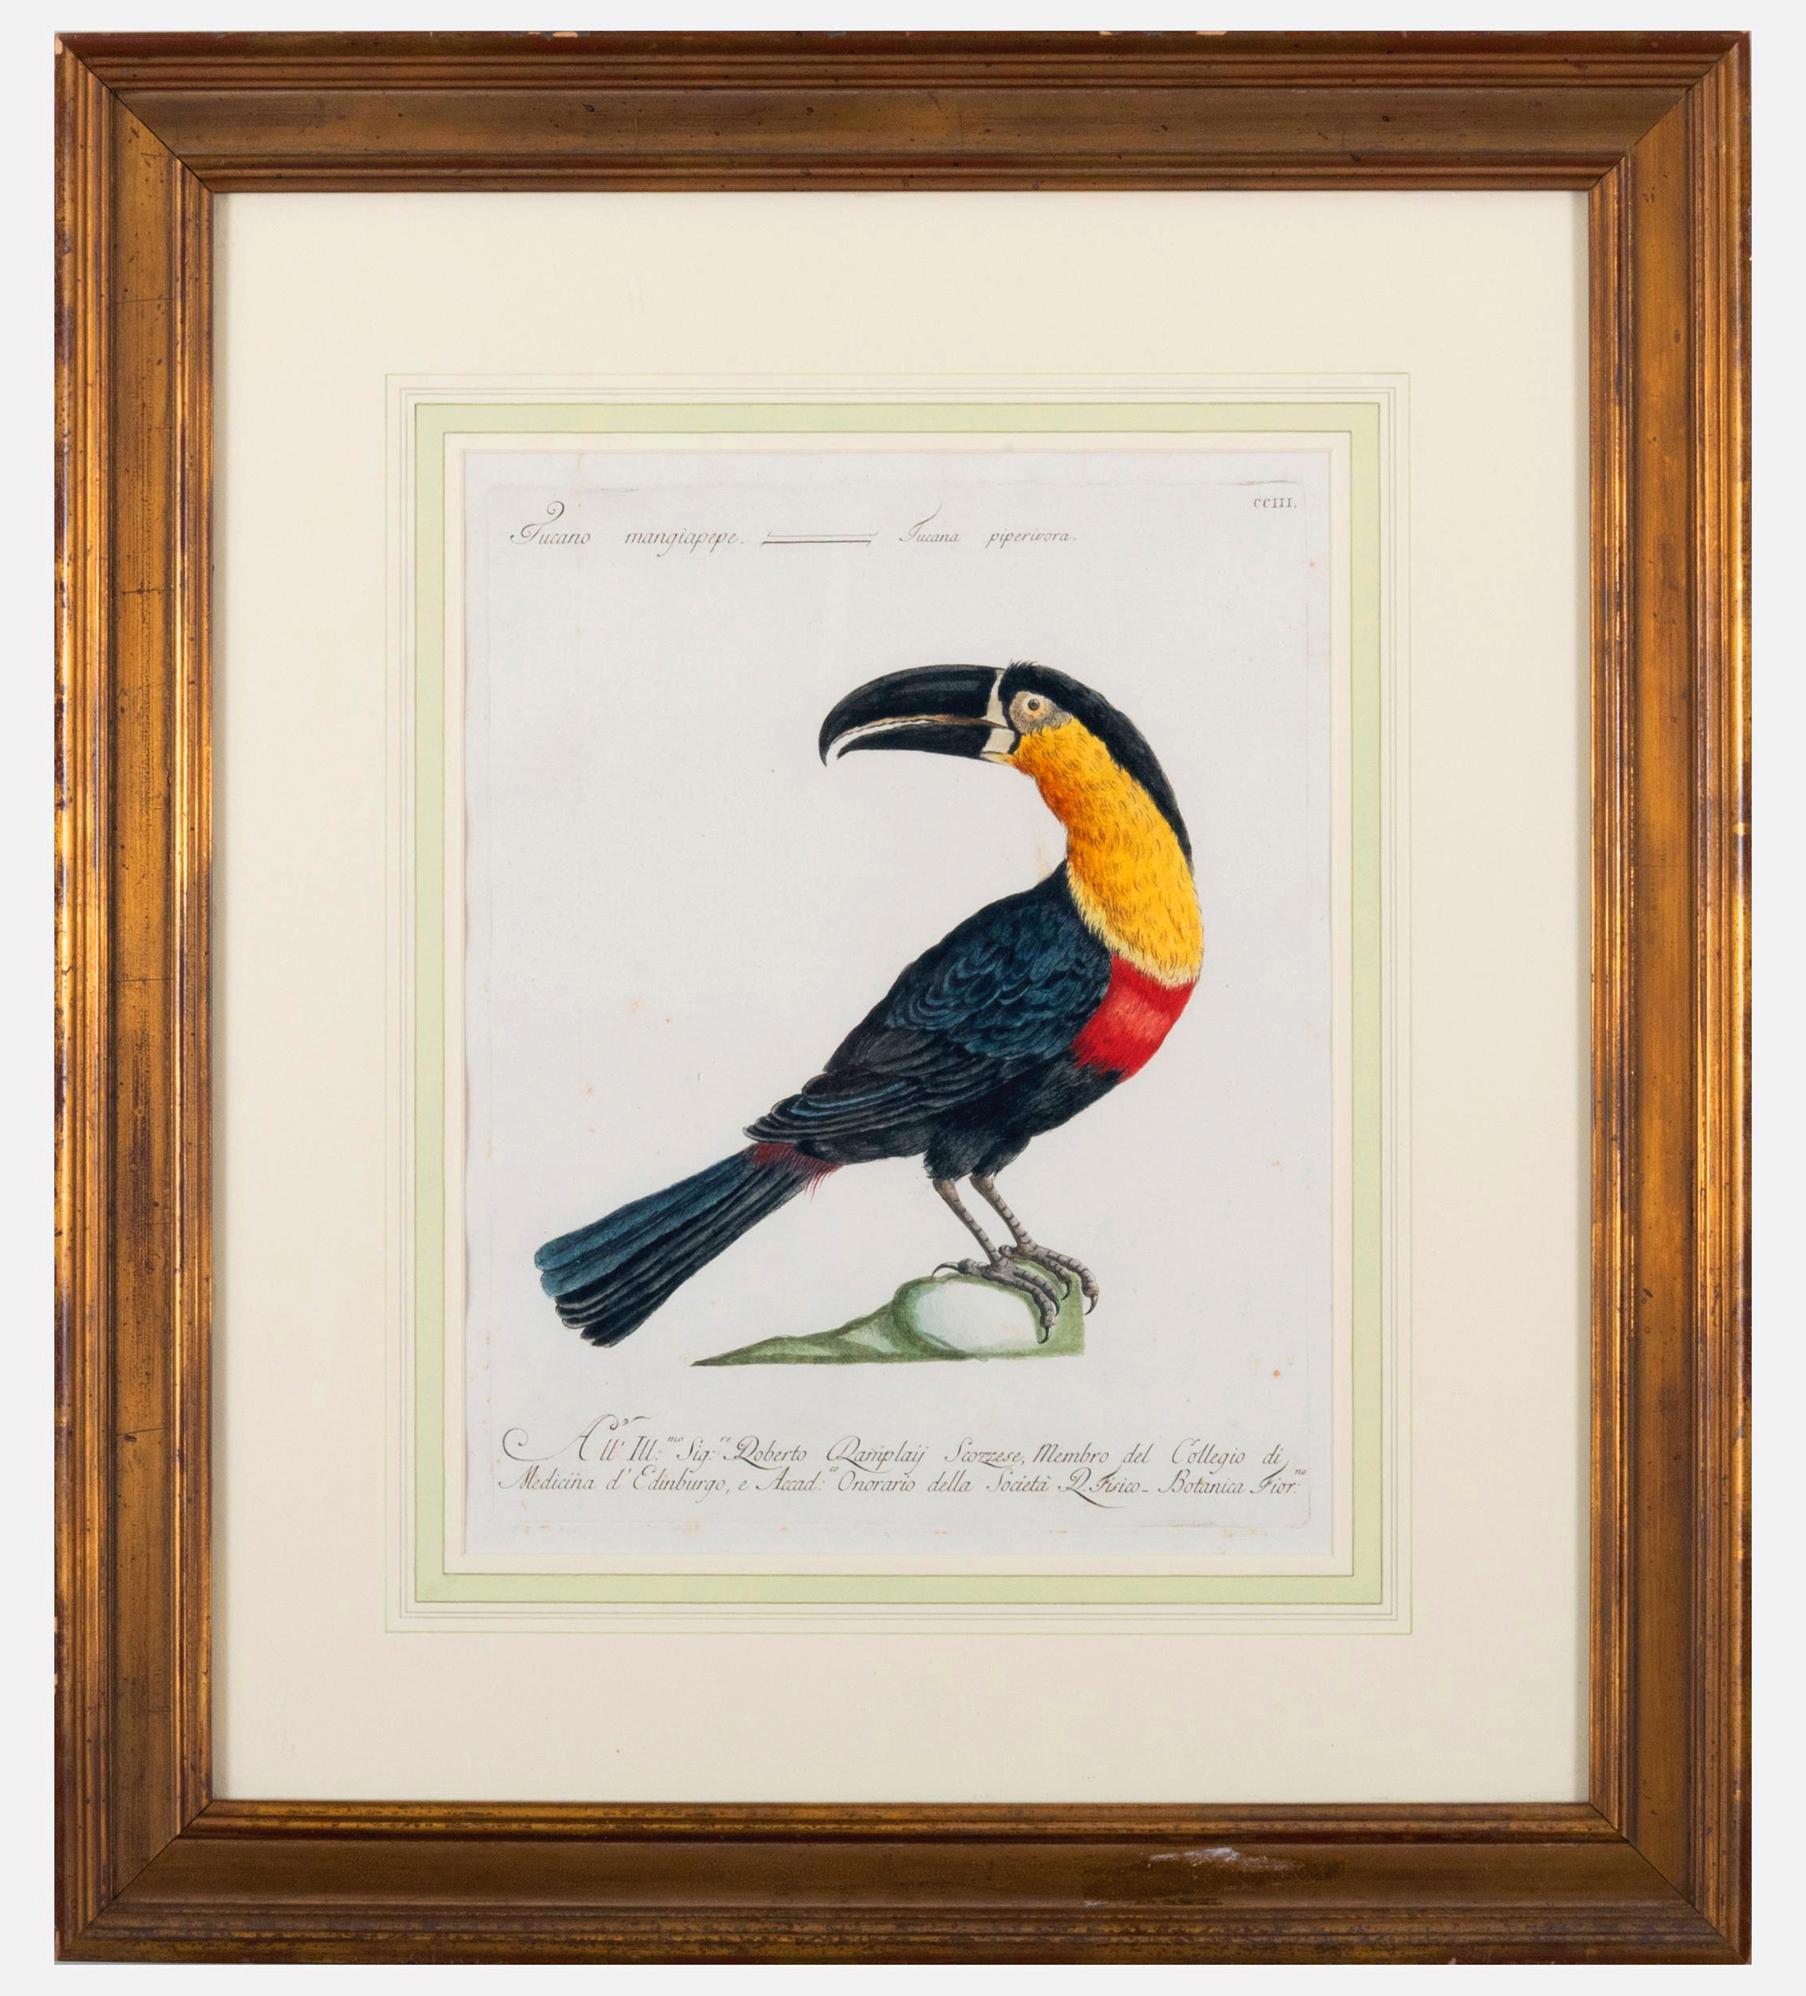 Antique engraving of a Tucano Mangiapepe,
by Saverio Manetti
Circa 1776

A fine hand colored engraving of a Tuscan Magpie by the Italian artist Saverio Manetti. Manetti drew his work predominantly from real specimens. The work was one of the